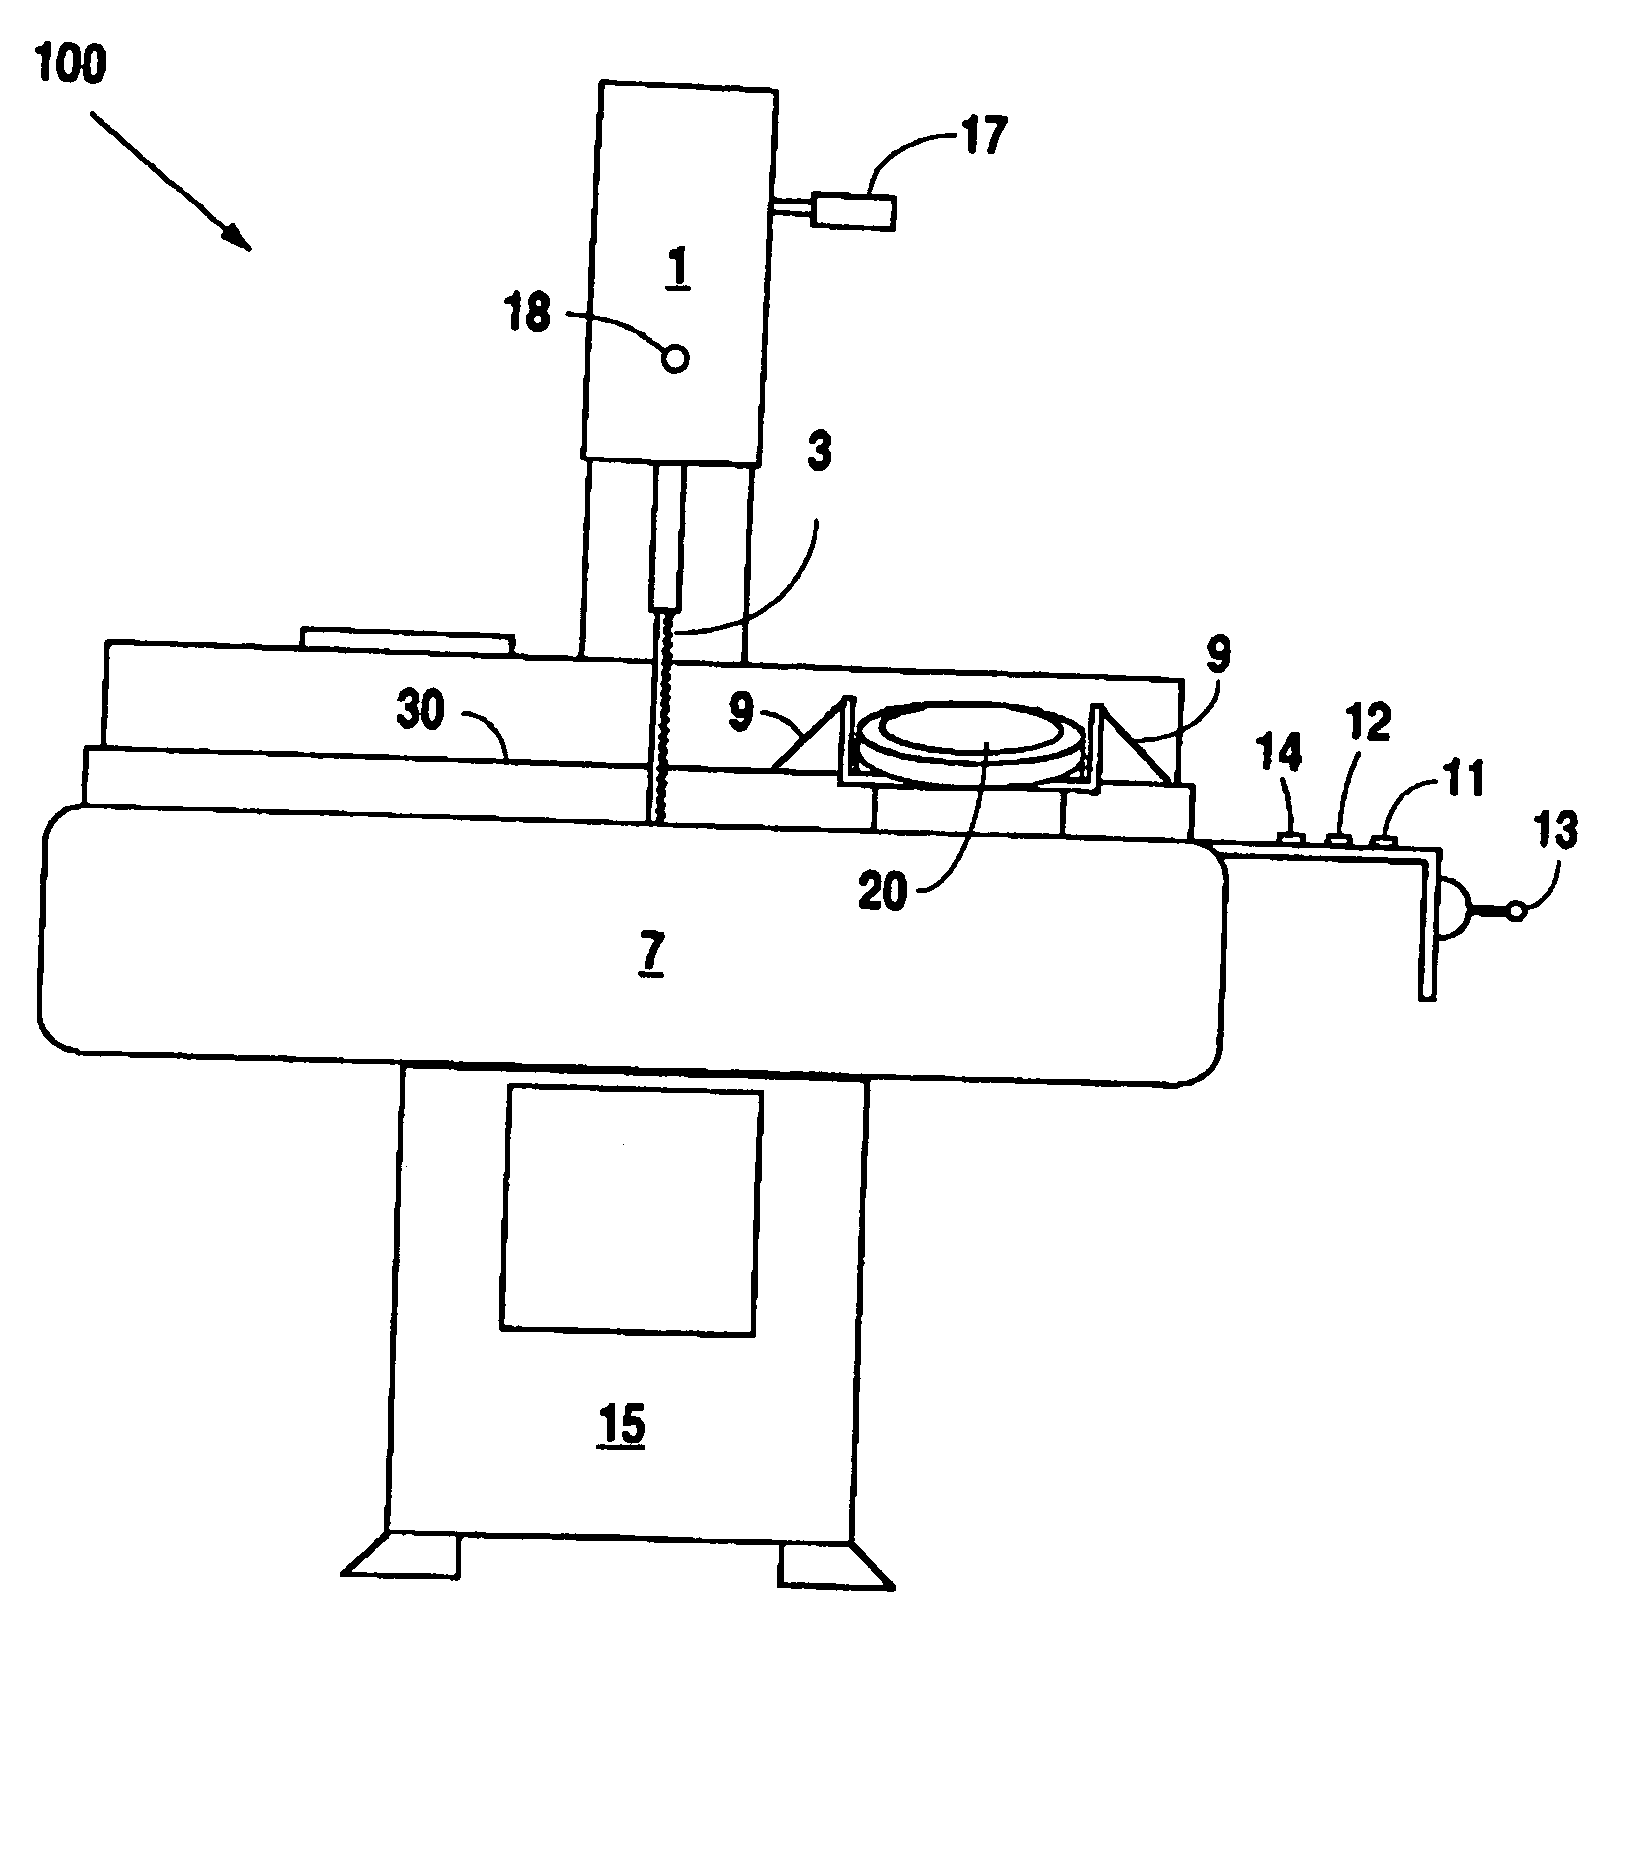 Apparatus and method for cutting meat